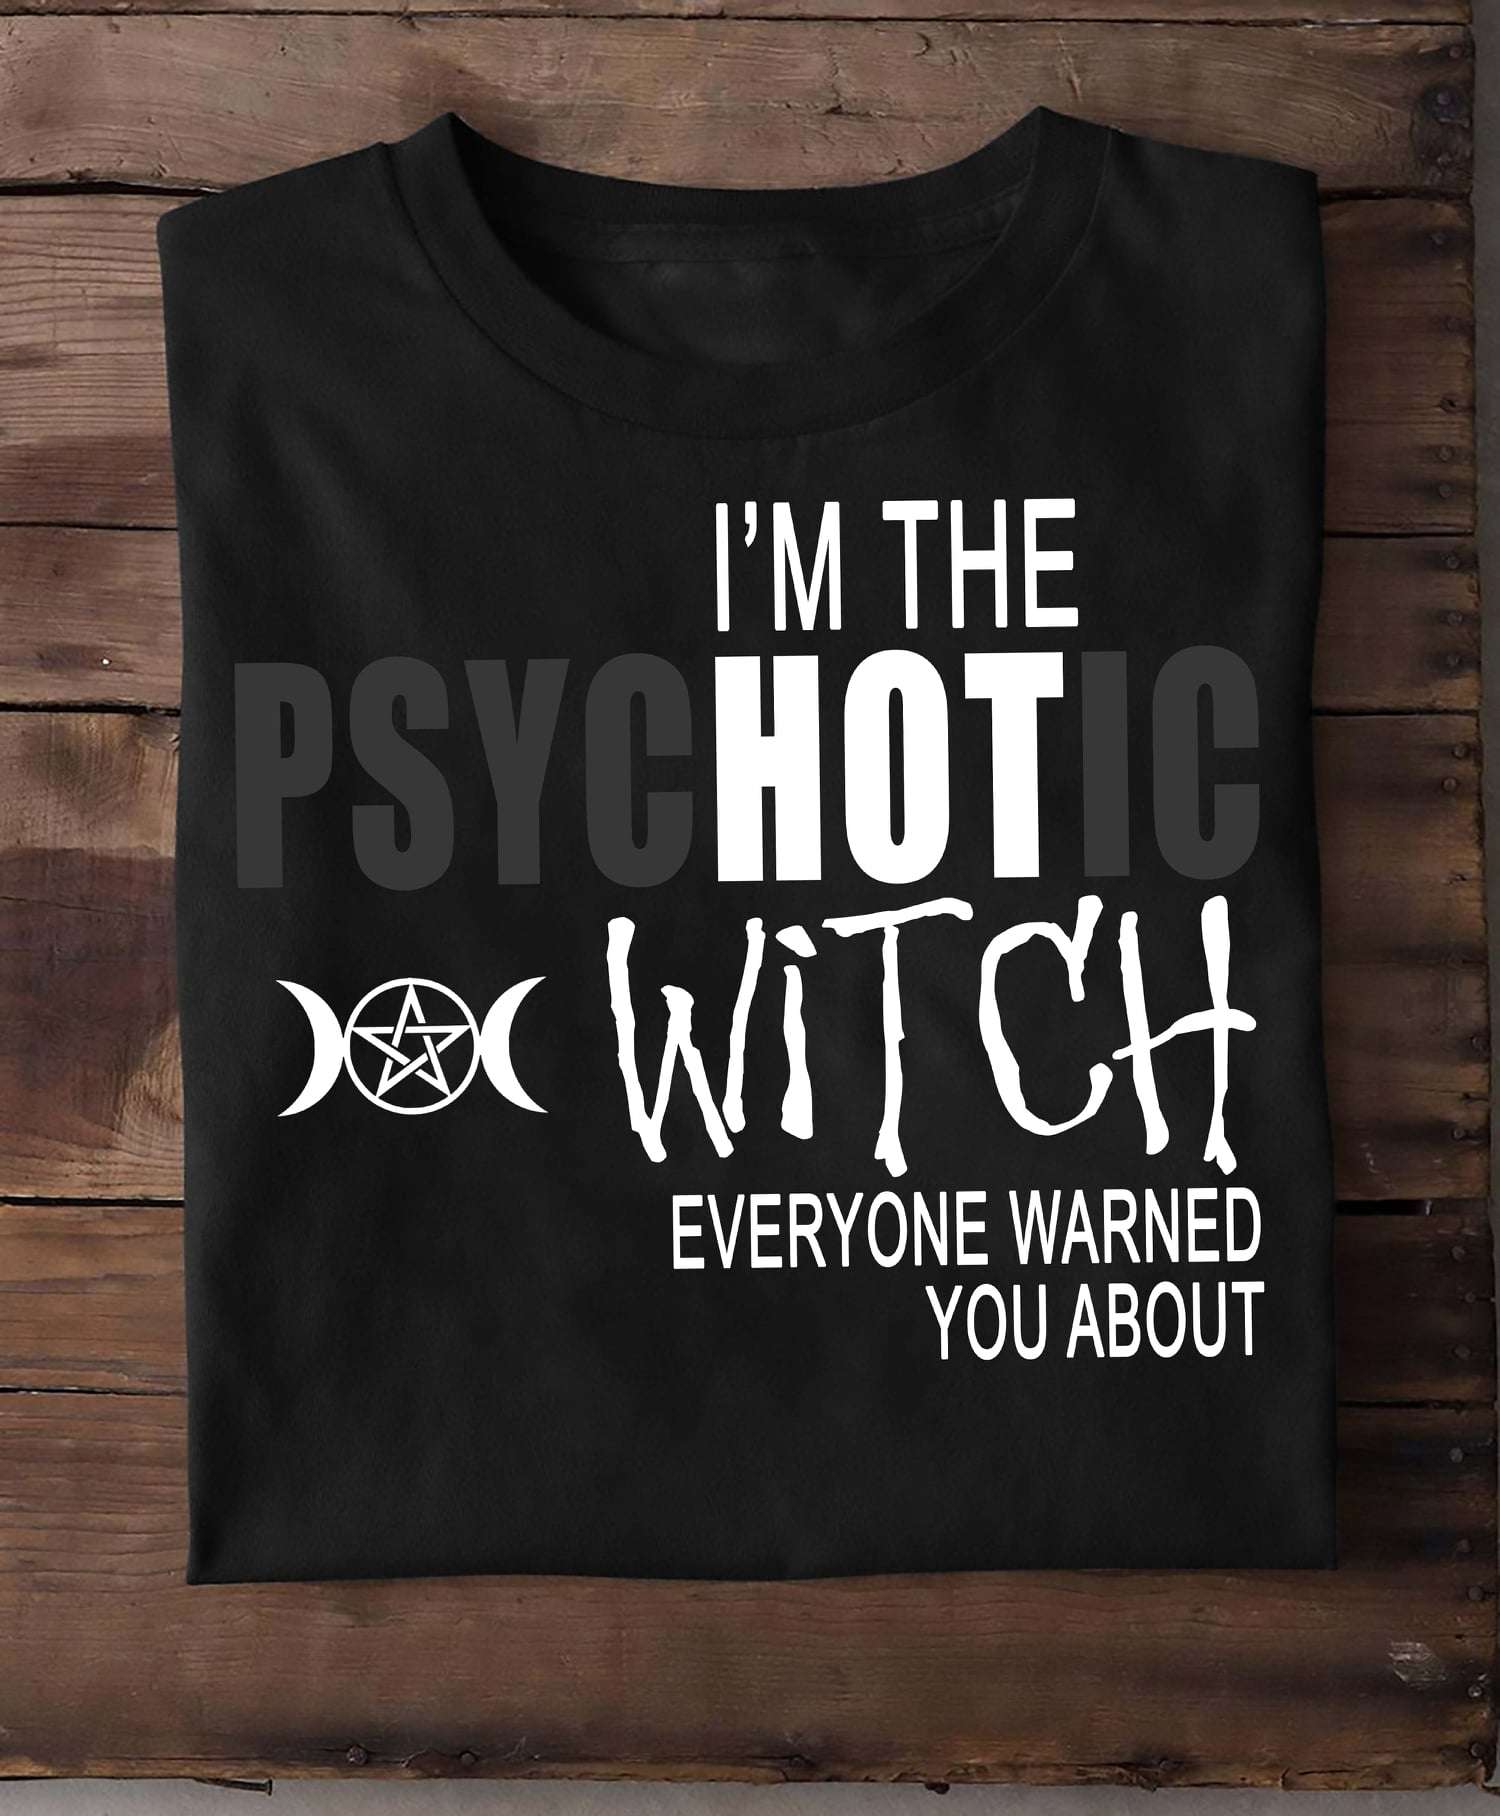 I'm the psychotic witch everyone warned you about - Hot witch halloween, halloween witch costume